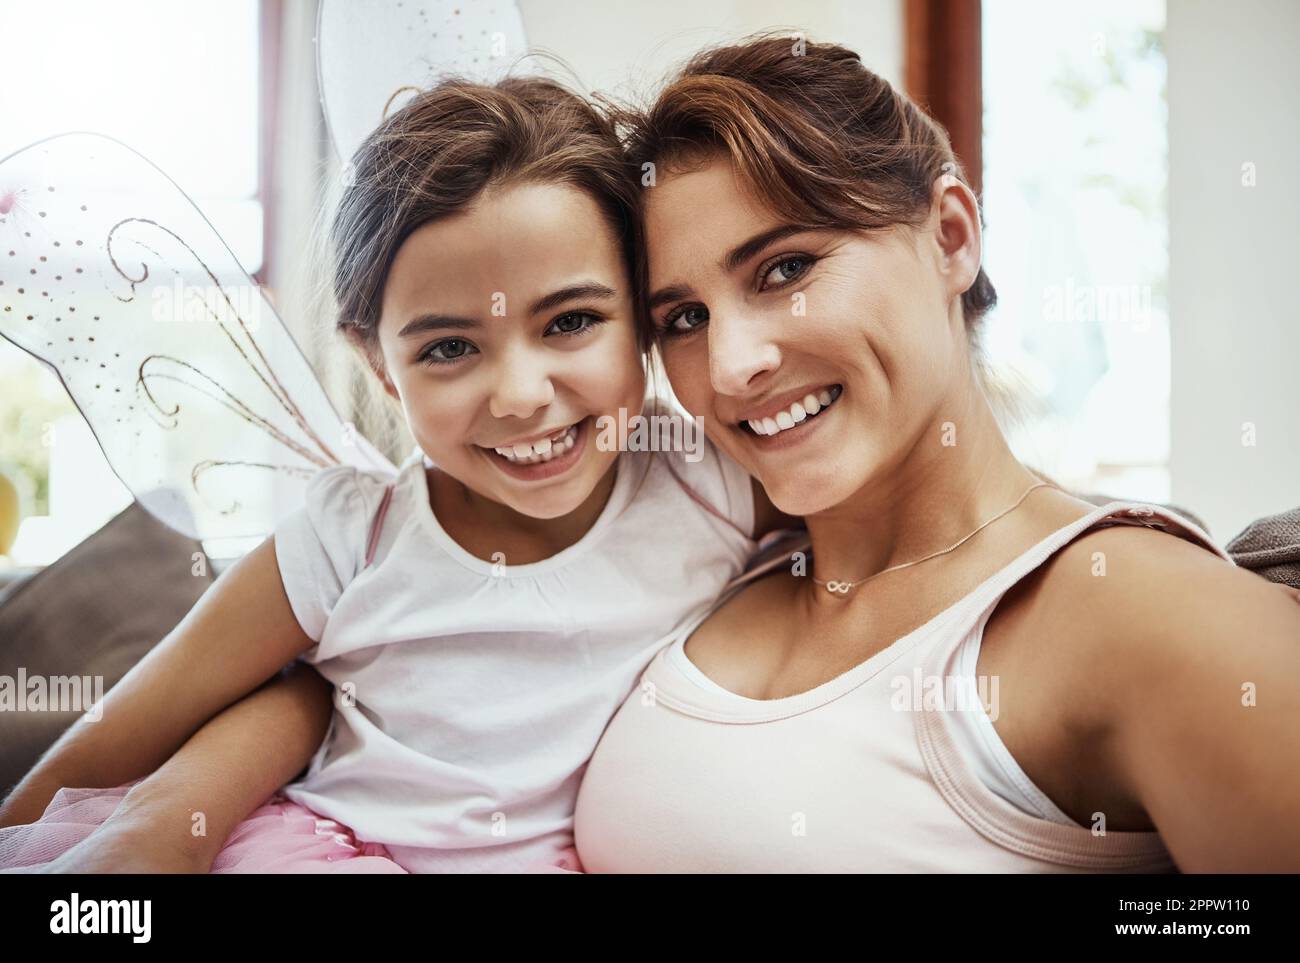 Bright And Blissful Moments Portrait Of A Mother And Her Little 